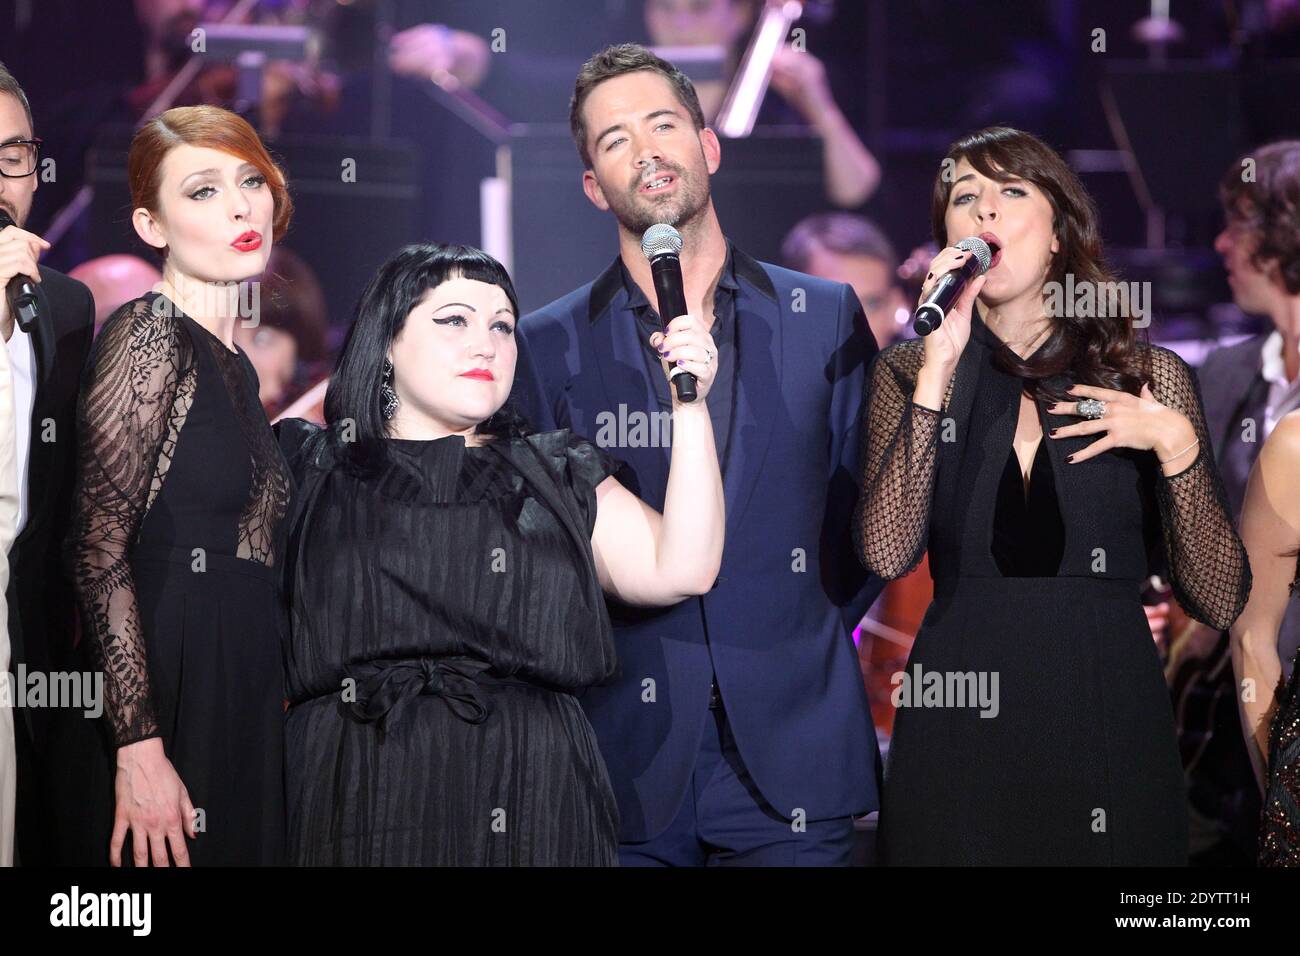 Elodie Frege, Beth Ditto, Emmanuel Monge and Nolwenn Leroy perform during the Francofolies concert tribute to Edith Piaf at the Beacon Theater in New York City, NY, USA on September 19, 2013. Photo by Charles Guerin/ABACAPRESS.COM Stock Photo